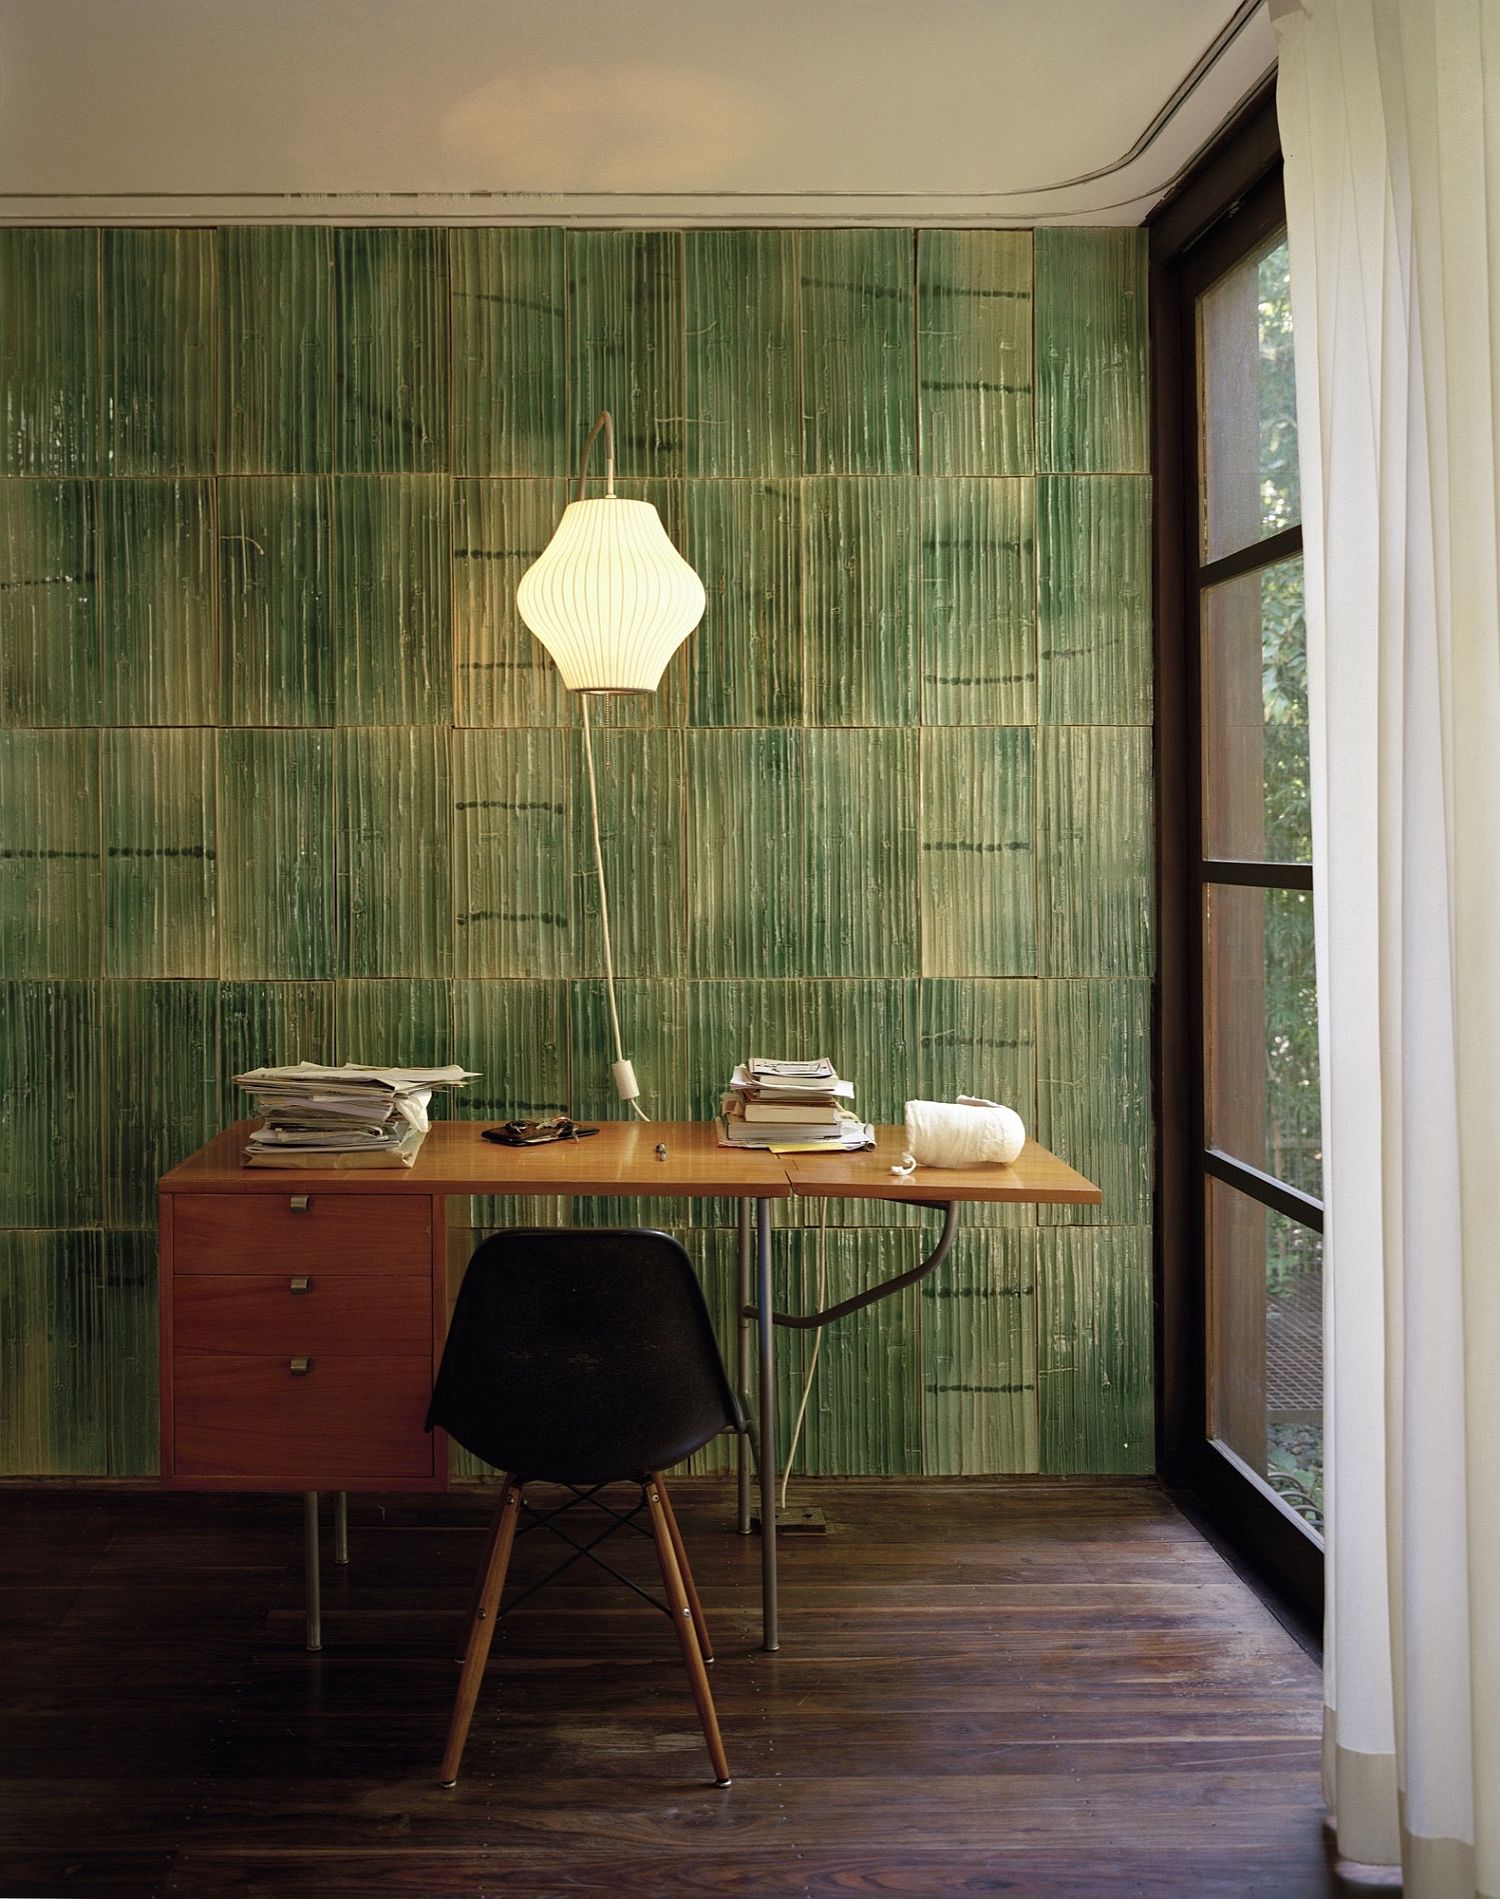 Custom-green-tiles-on-the-wall-add-ro-the-Asian-style-of-the-interior